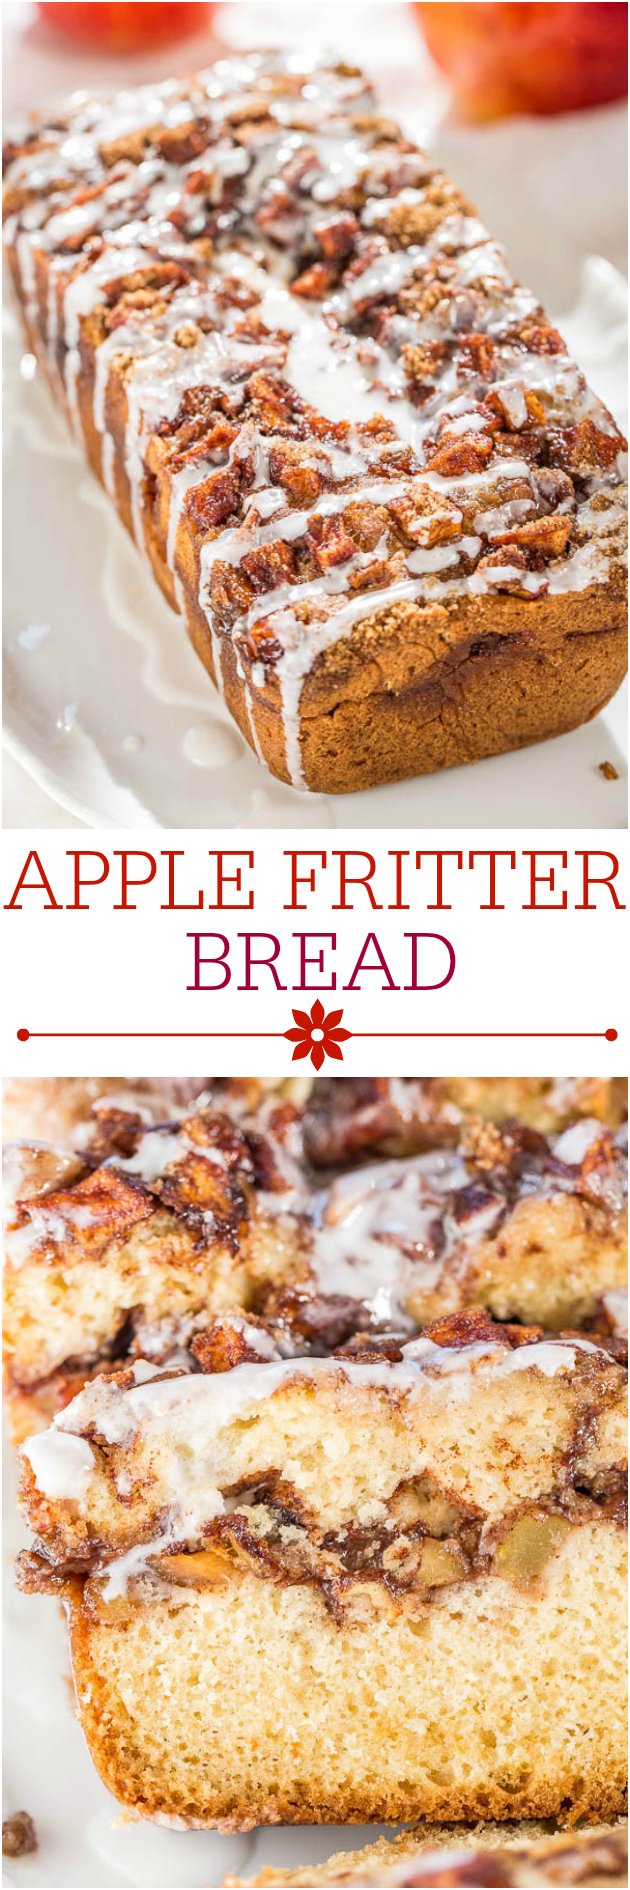 Apple Fritter Bread - Soft, fluffy bread that's stuffed AND topped with apples, cinnamon, and sugar!! Like apple fritters in bread form!! Best apple bread EVER!